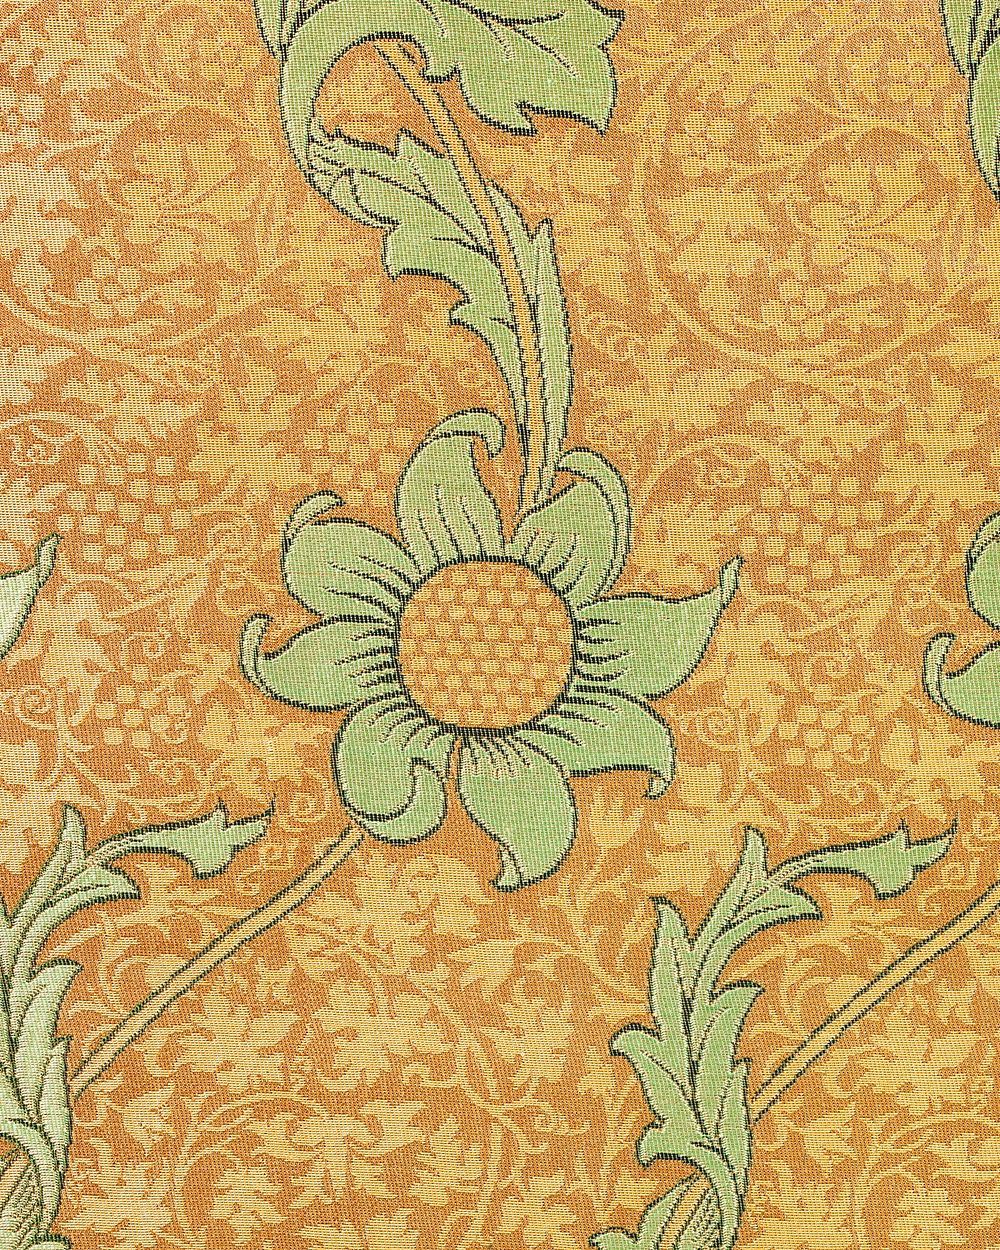 William Morris's (1834-1896) Kennet famous pattern. Original from The MET Museum. Digitally enhanced by rawpixel.